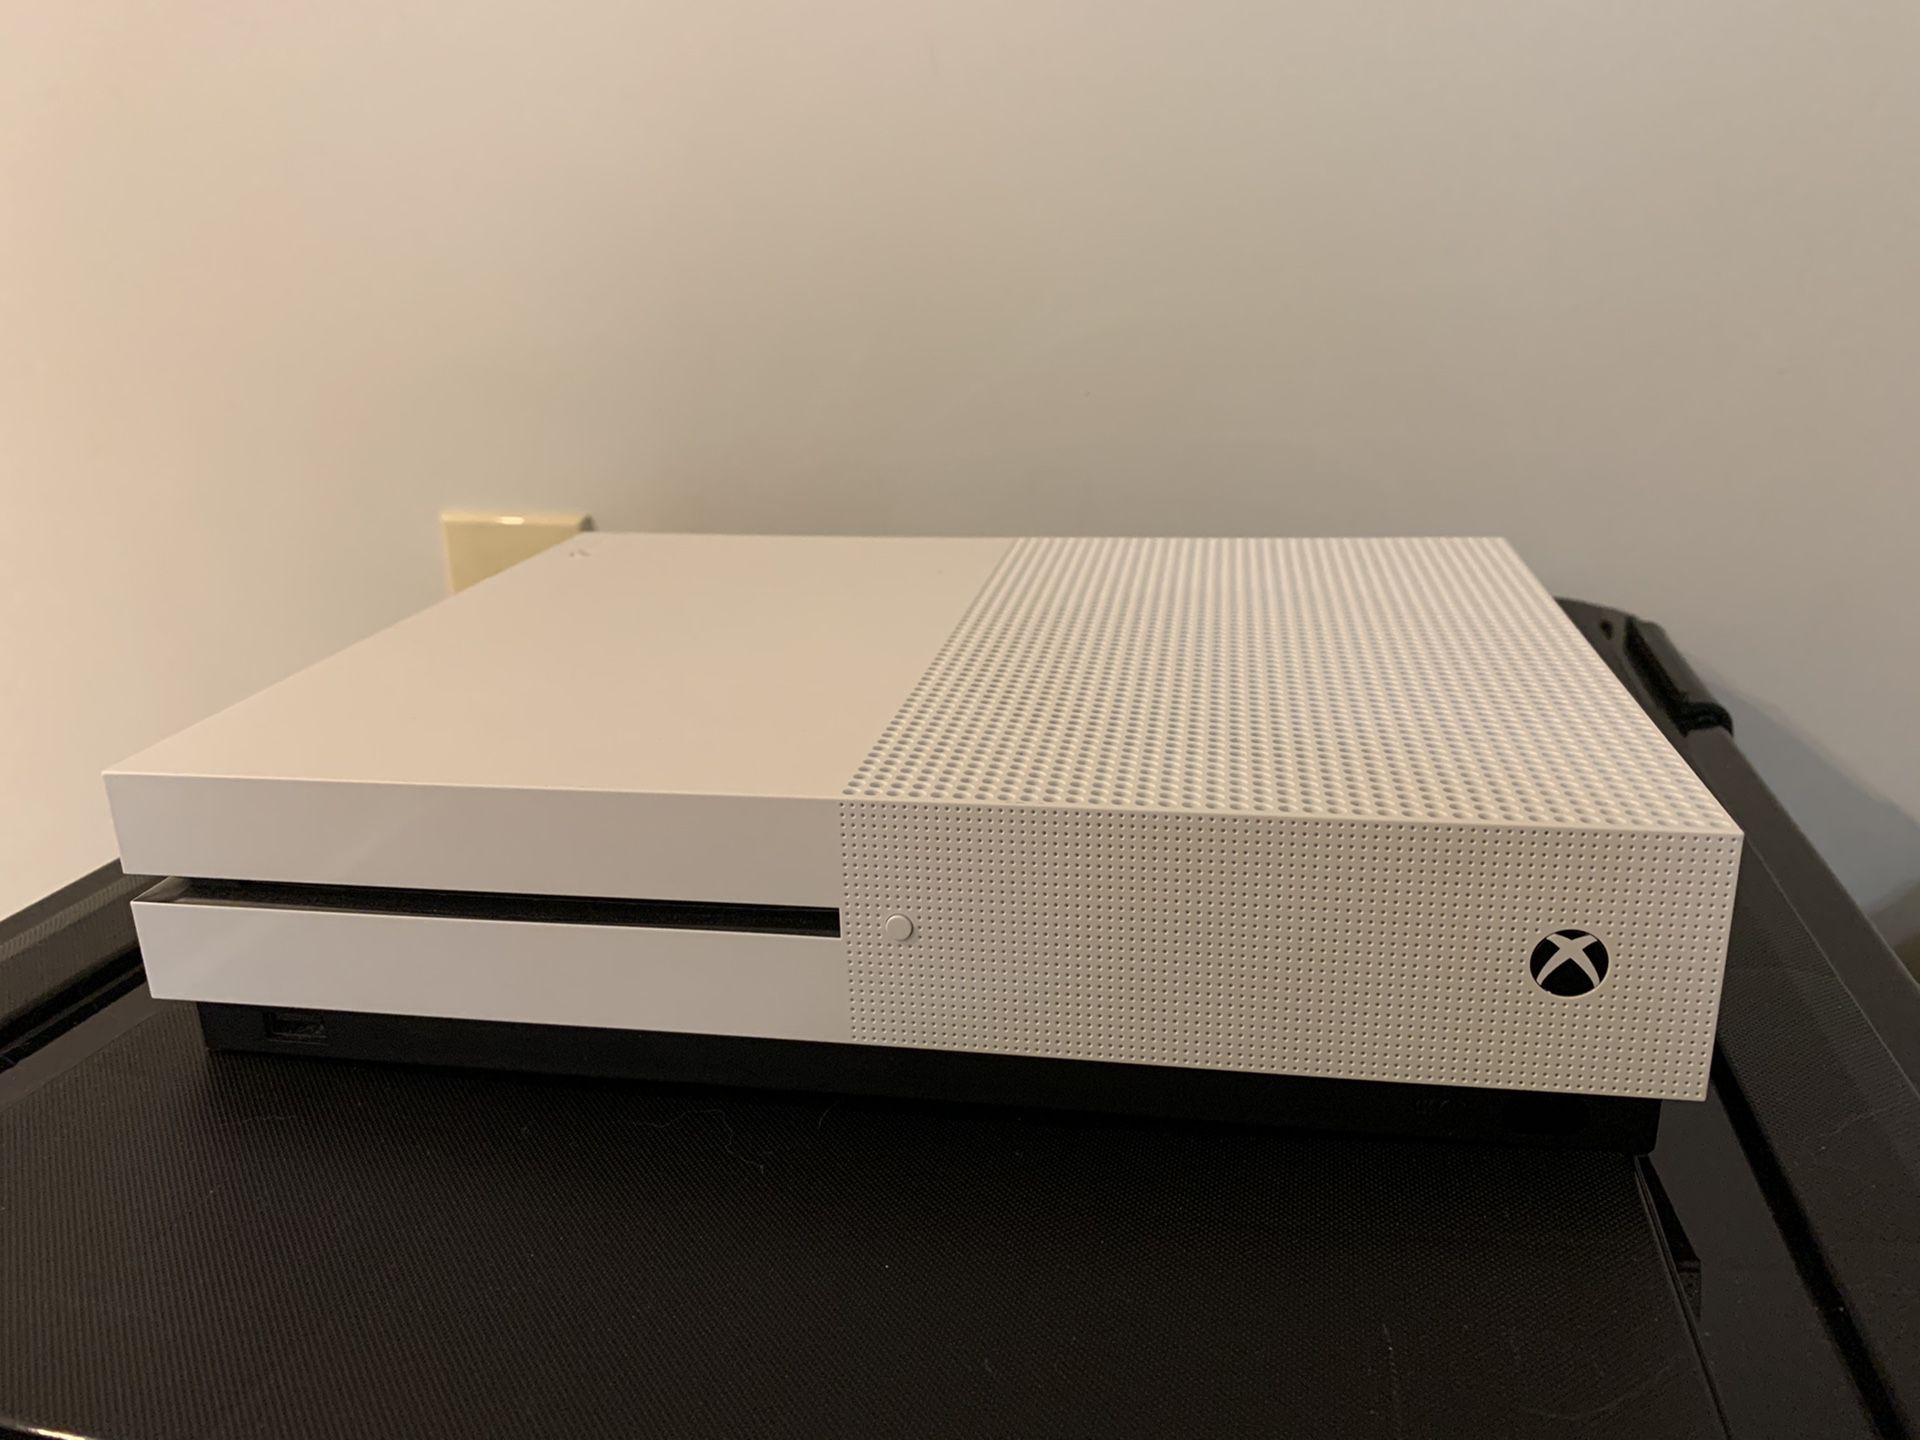 Xbox One S with two controllers, cords and three games